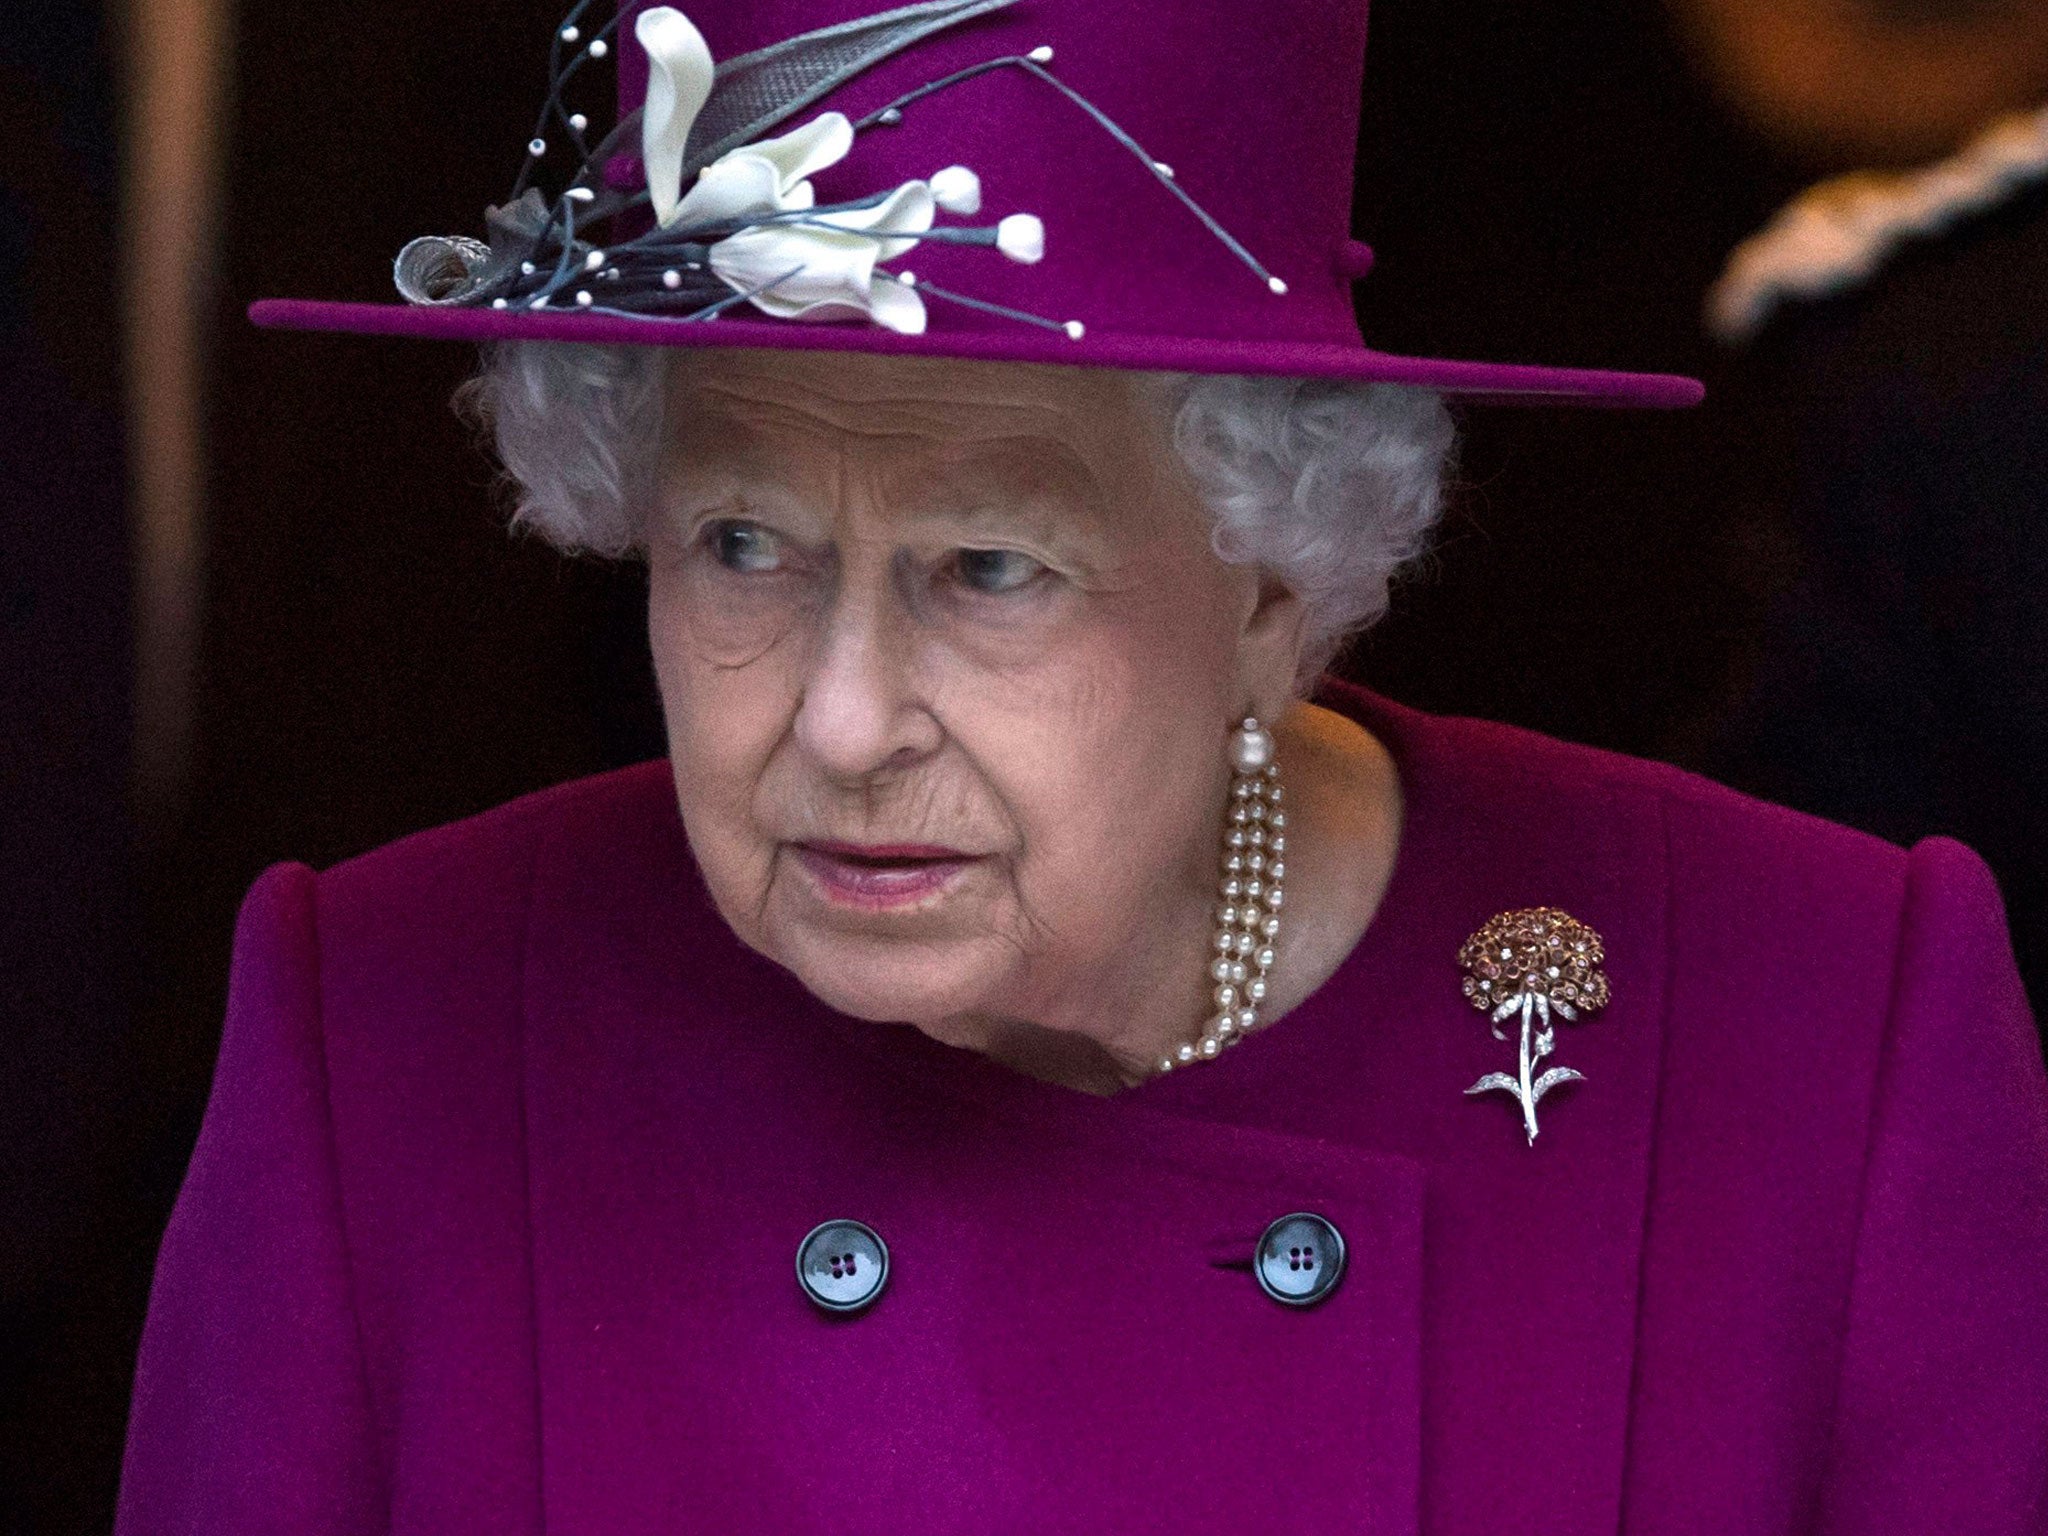 The Queen has been embarrassed by revelations that the Royal household invested millions offshore